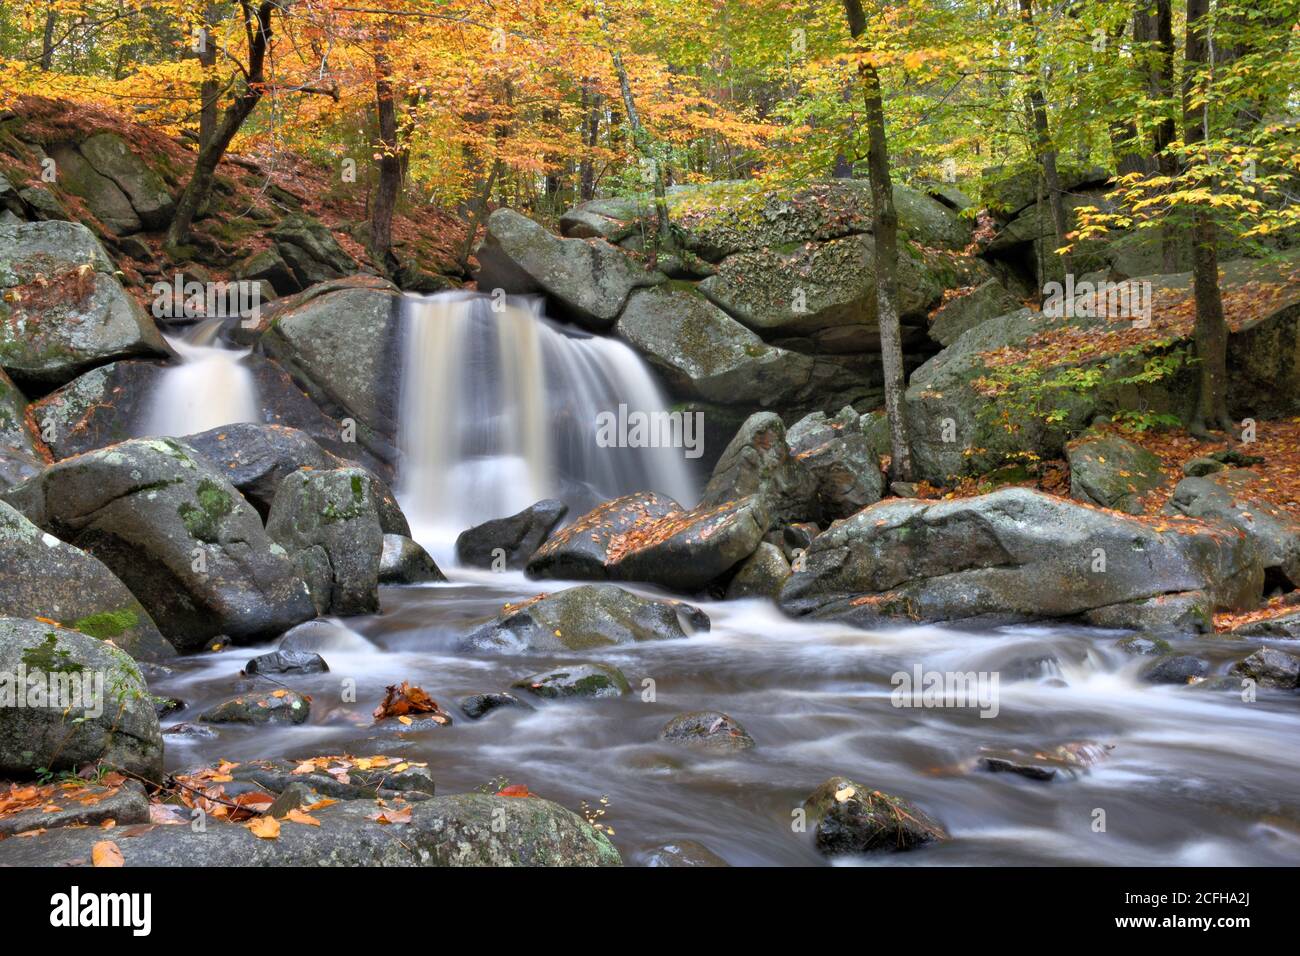 Autumn in New England. Fall foliage, scenic waterfall (Trap Falls), large boulders, and rushing brook in Willard Brook State Forest, Massachusetts. Stock Photo